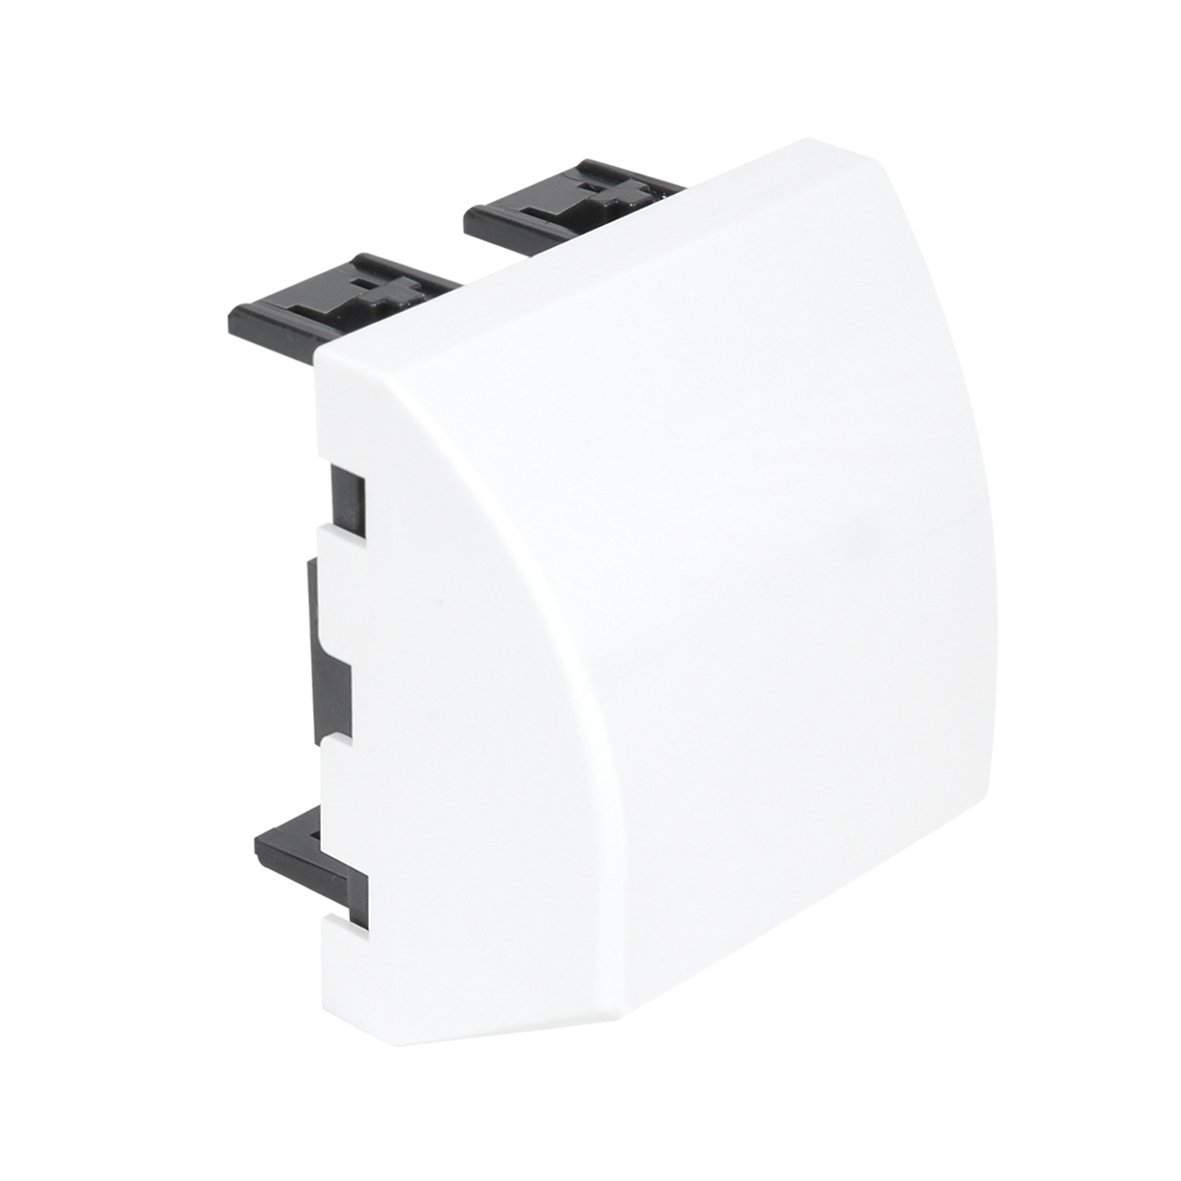 Cable outlet for casual flush-mounted apparatus